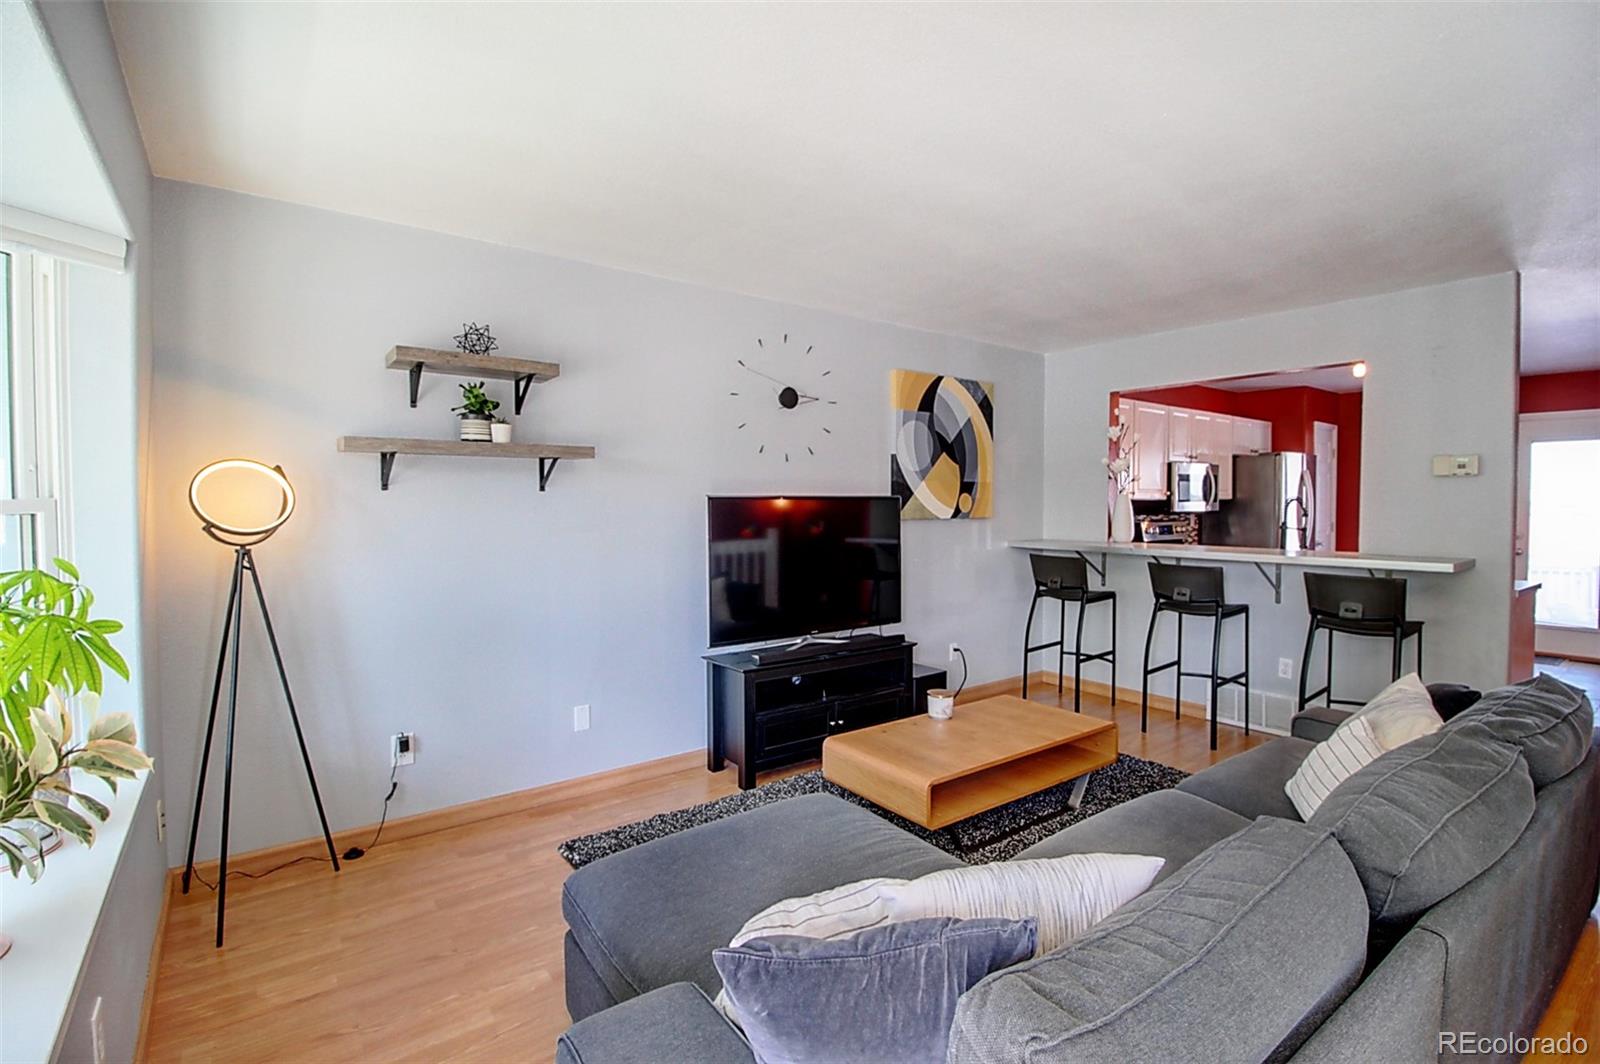 870 134th, Westminster, CO